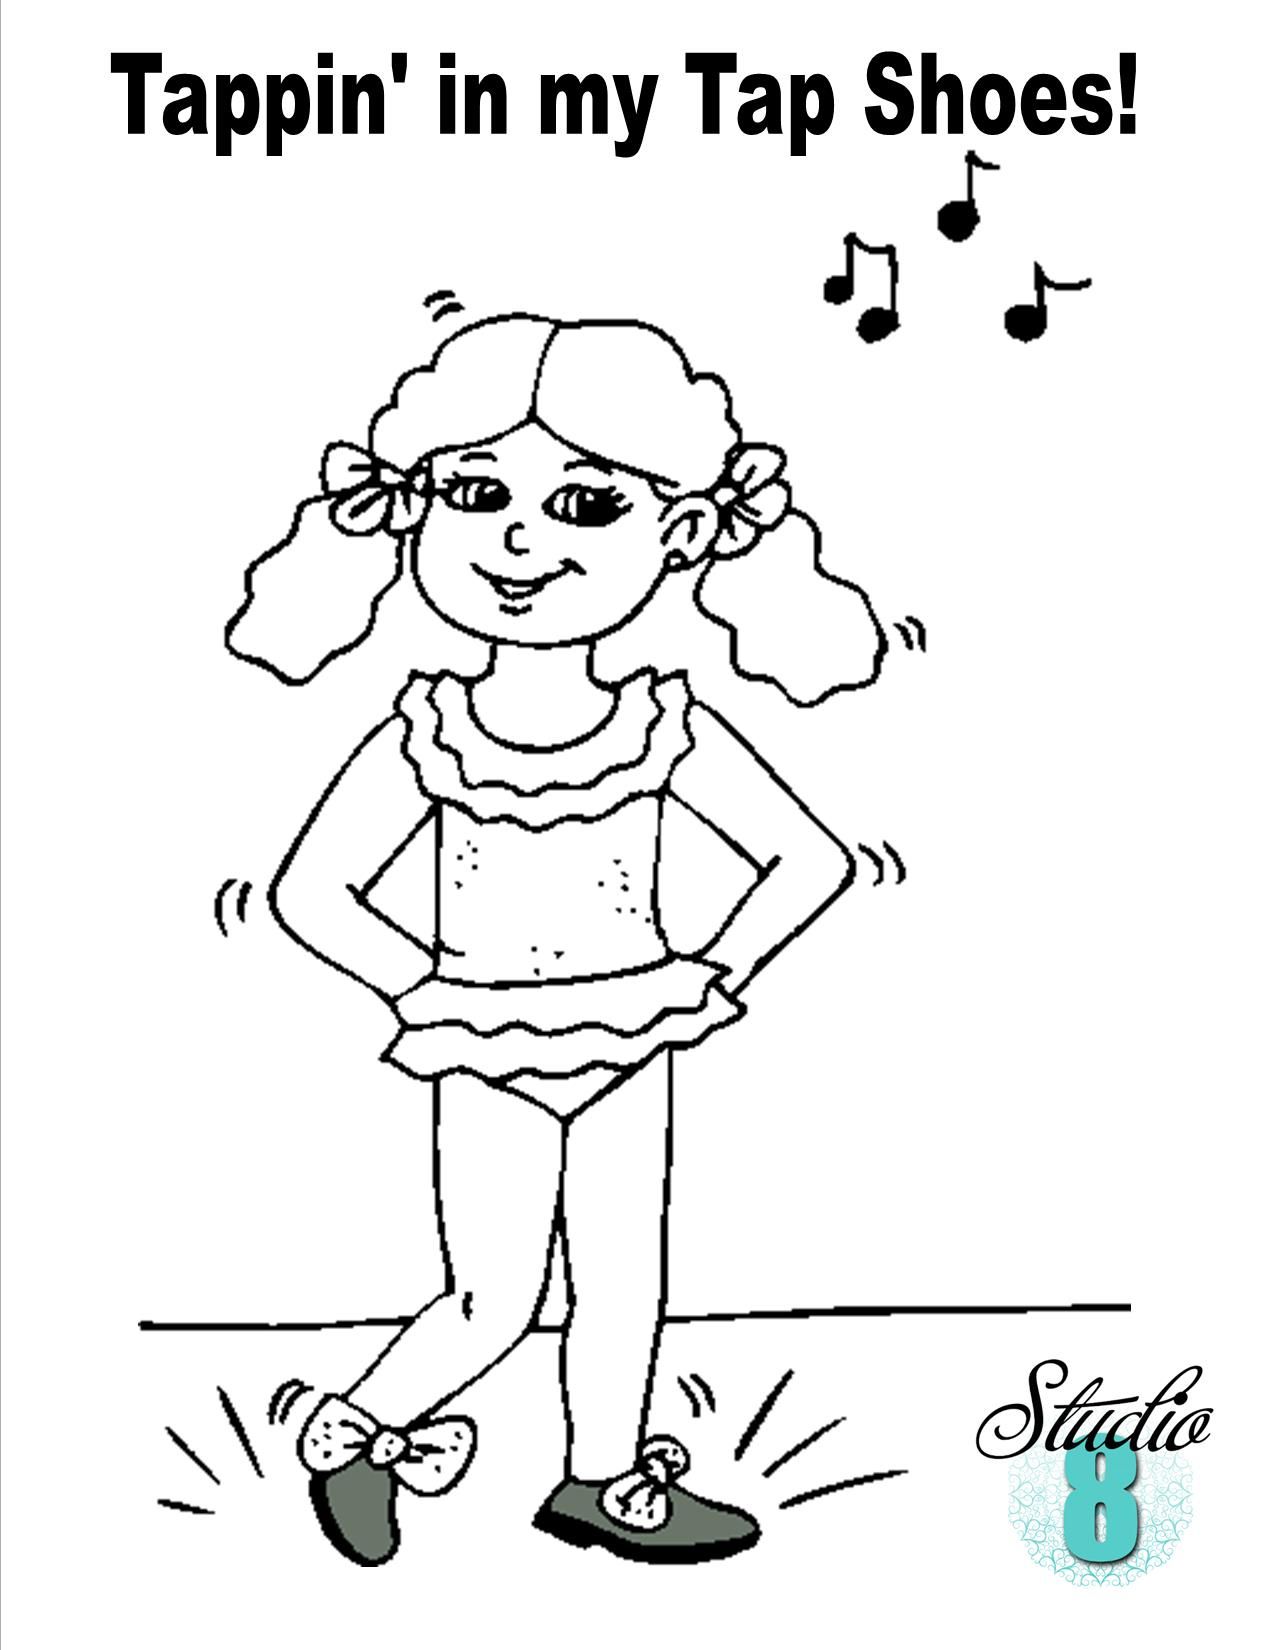 Tap Dancing - Coloring Pages for Kids and for Adults